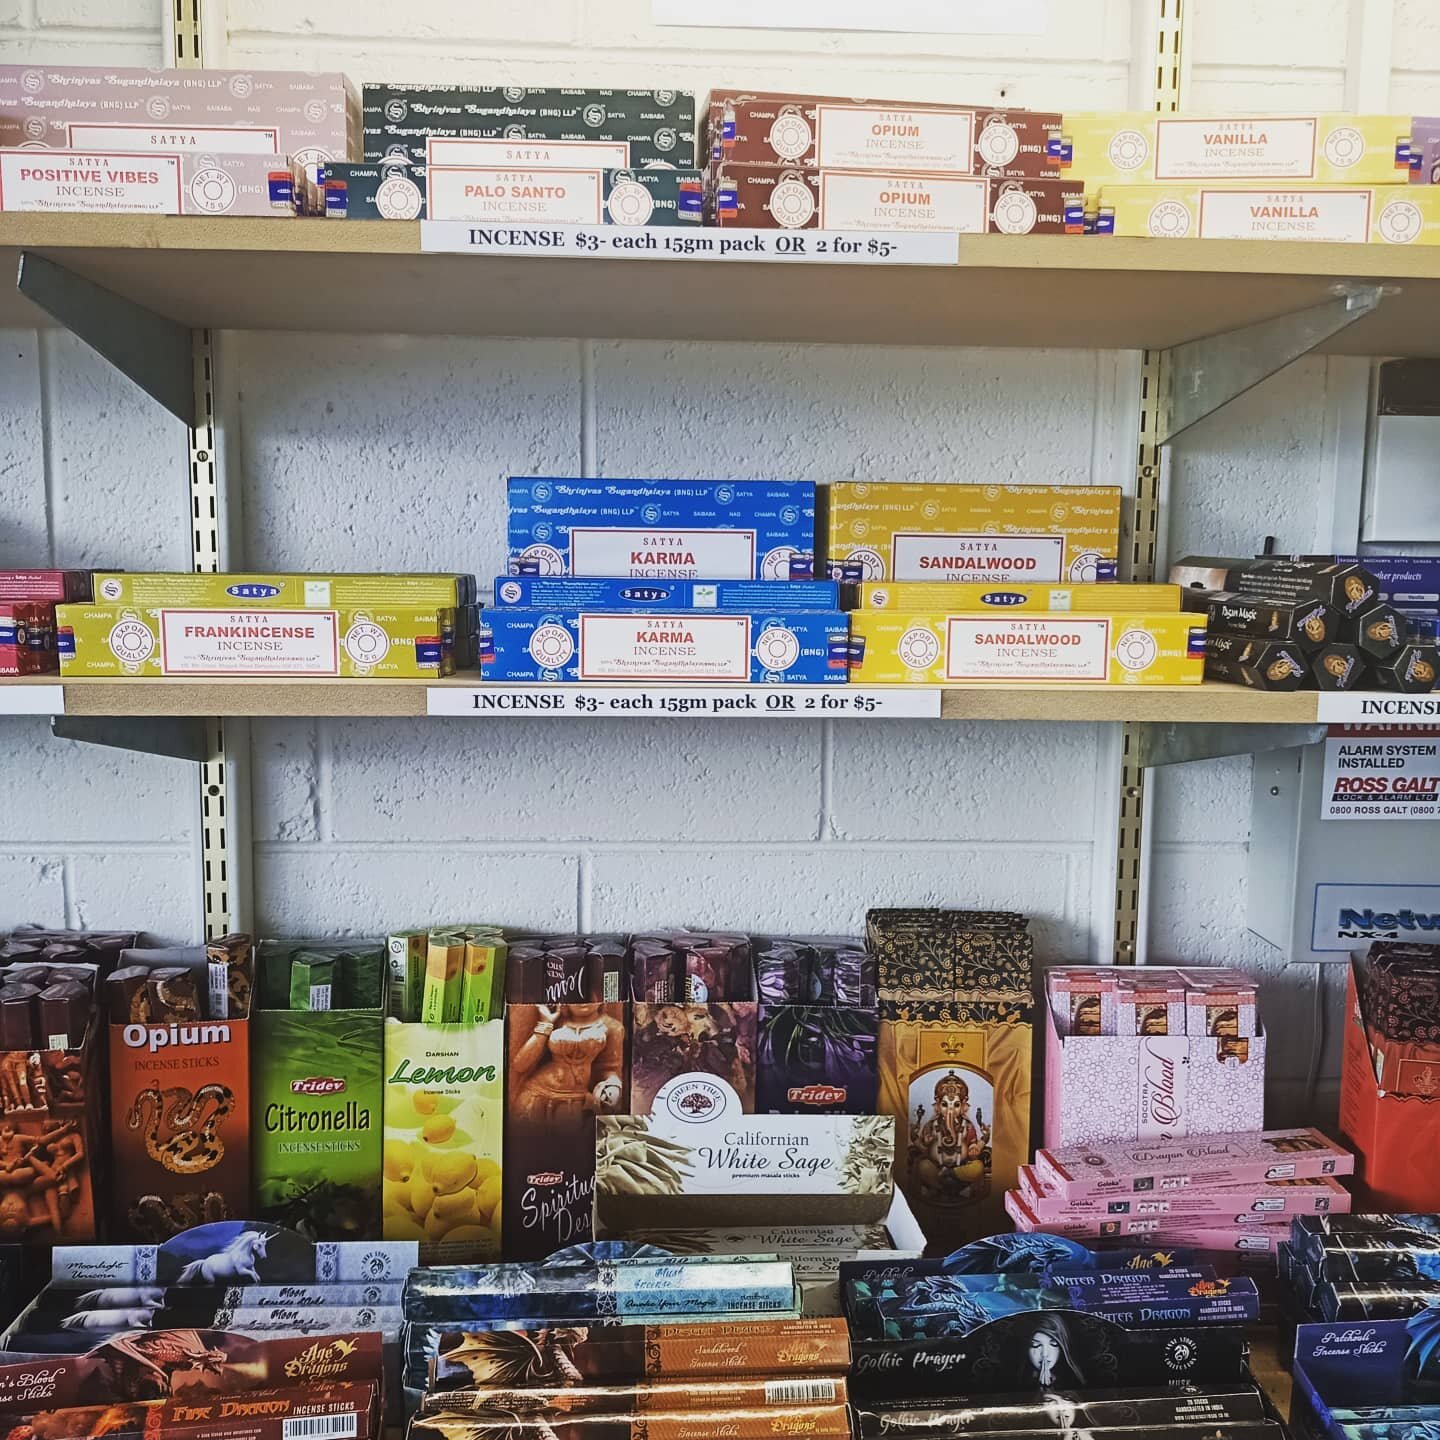 All 15gm incense boxes 
$3 each or 2for $5
Yes that includes the Nag Champa Satya range

In-store at 
Soap Shack Emporium
383 Main South Rd Hornby
LATE NIGHT TONIGHT

#incense #gifts #naturalhealth #hempproducts #healthandwellbeing #shampoobars #supp